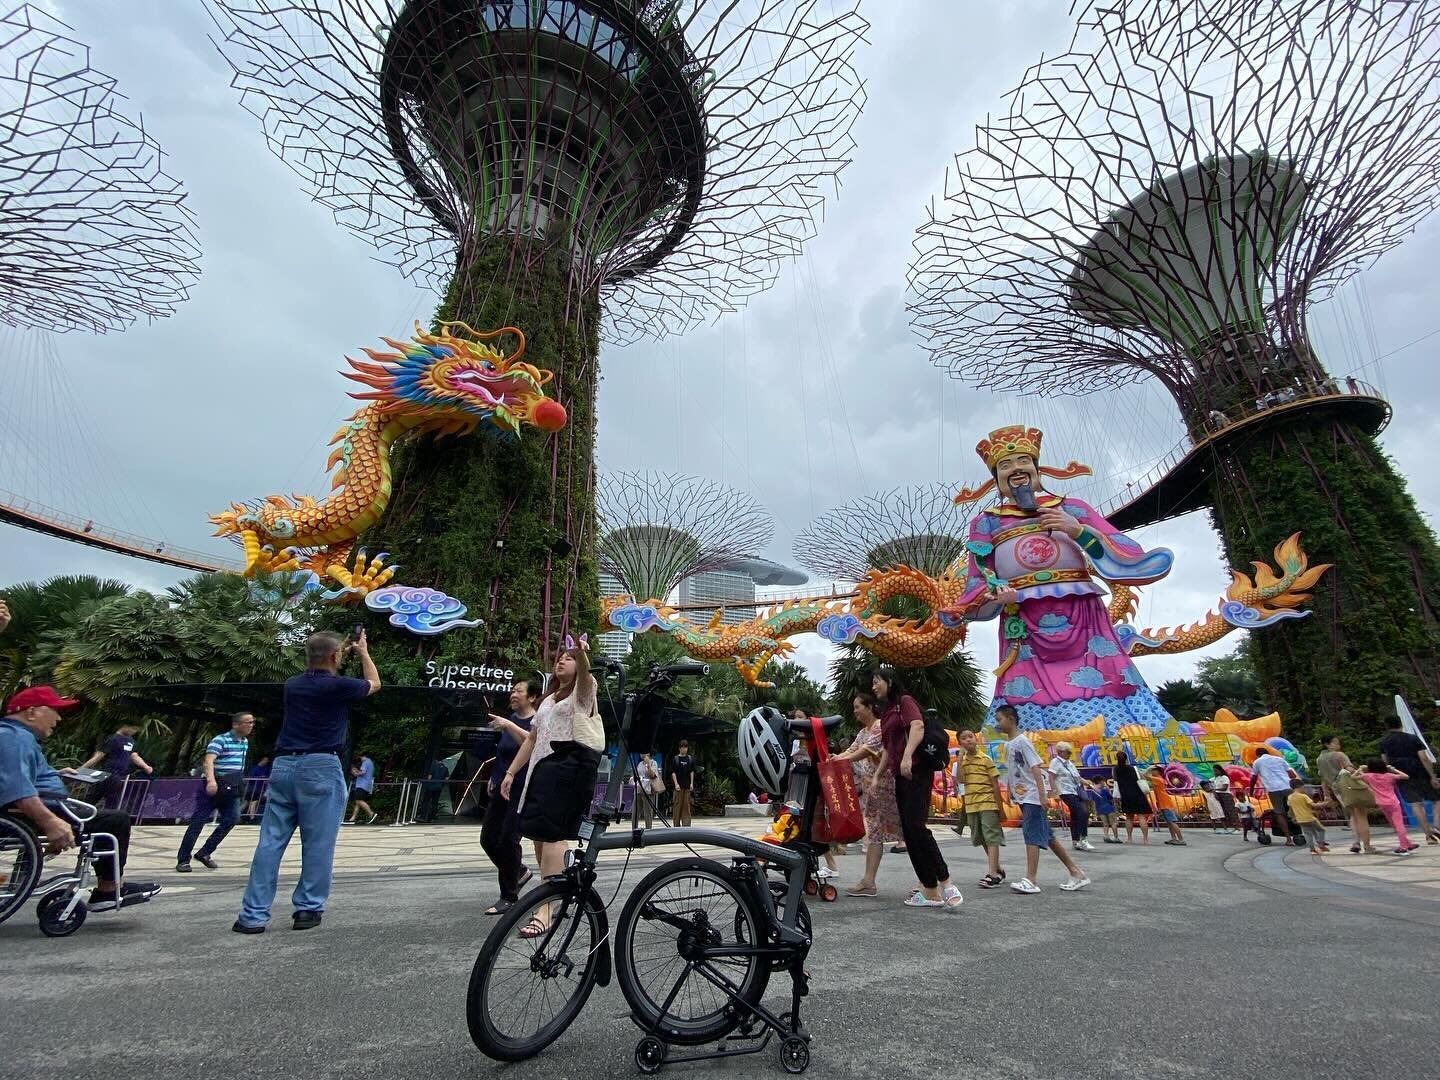 The Dragon and God of Wealth towering over my bike at Supertree Grove of Gardens by the Bay! #gardensbythebay #supertreegrove #cny #cnydragon #godofwealth #brompton #bromptonbicycle #bromptoneer #bromptonsingapore